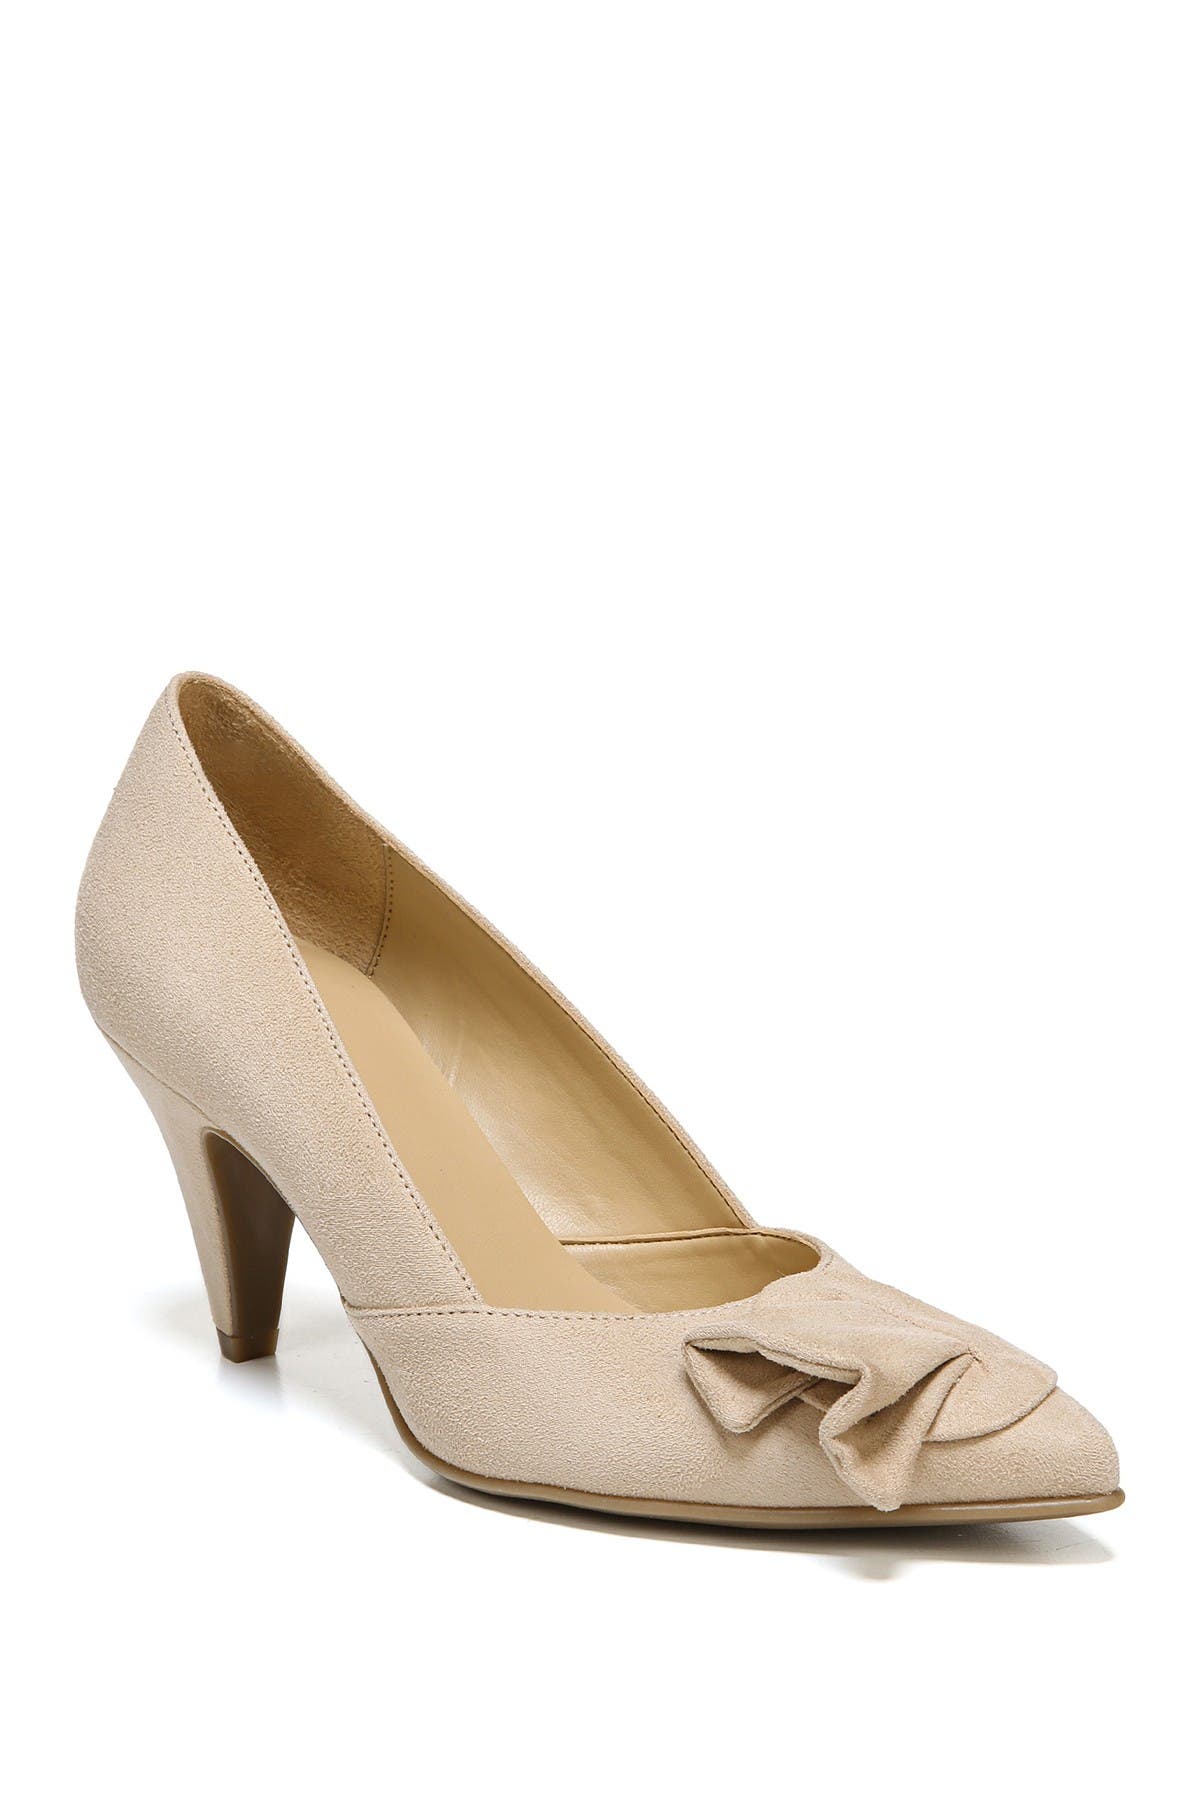 Naturalizer | Molly Knotted Pump - Wide 